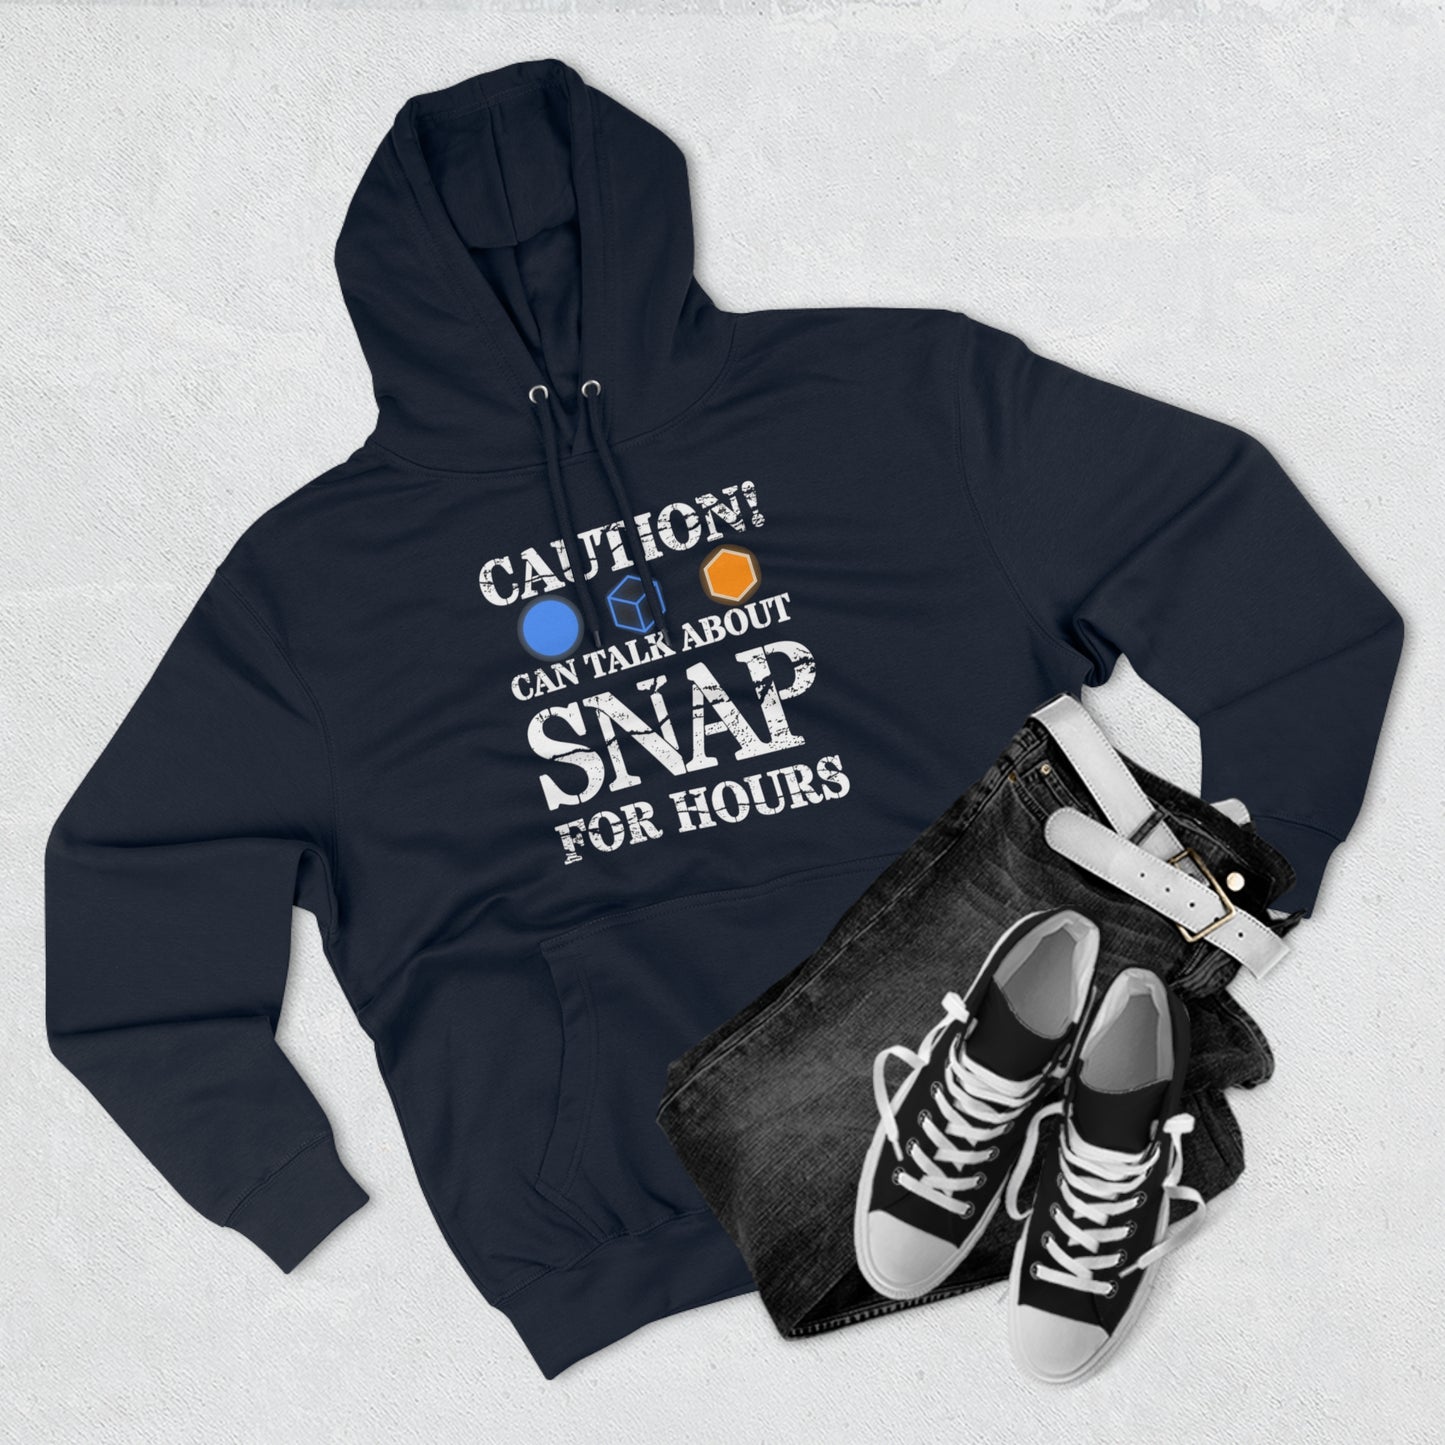 "Caution Can Snap All Day" Marvel Snap Unisex Premium Pullover Hoodie